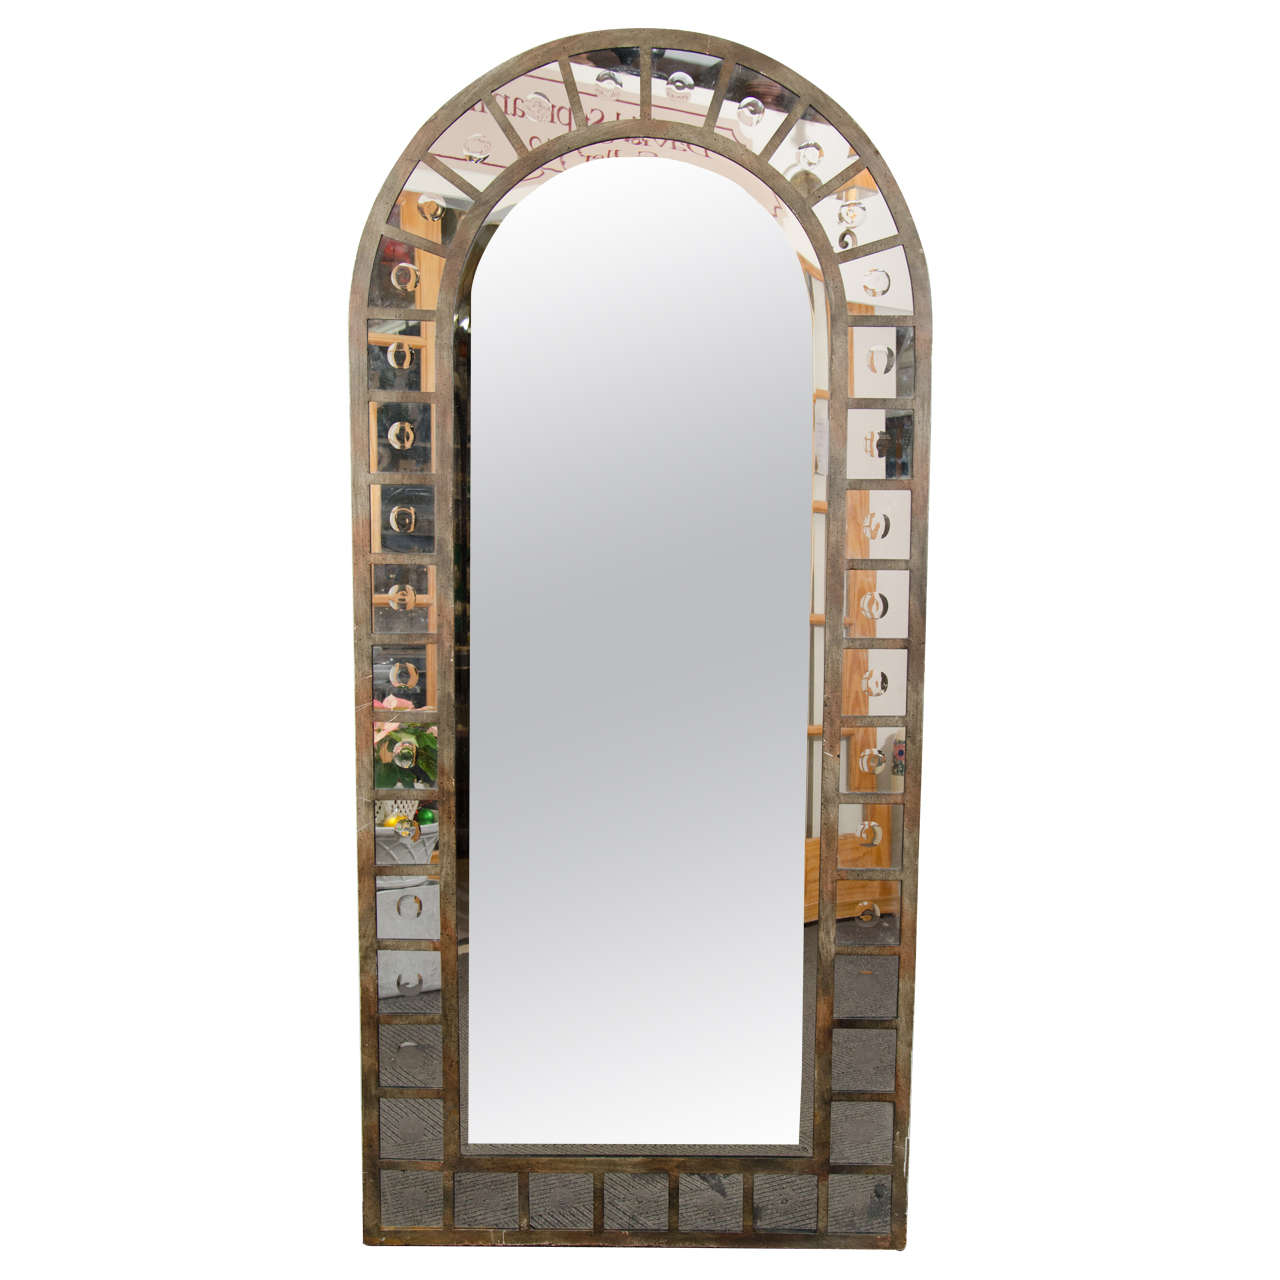 Steel Arched Mirror For At 1stdibs, Industrial Style Mirror